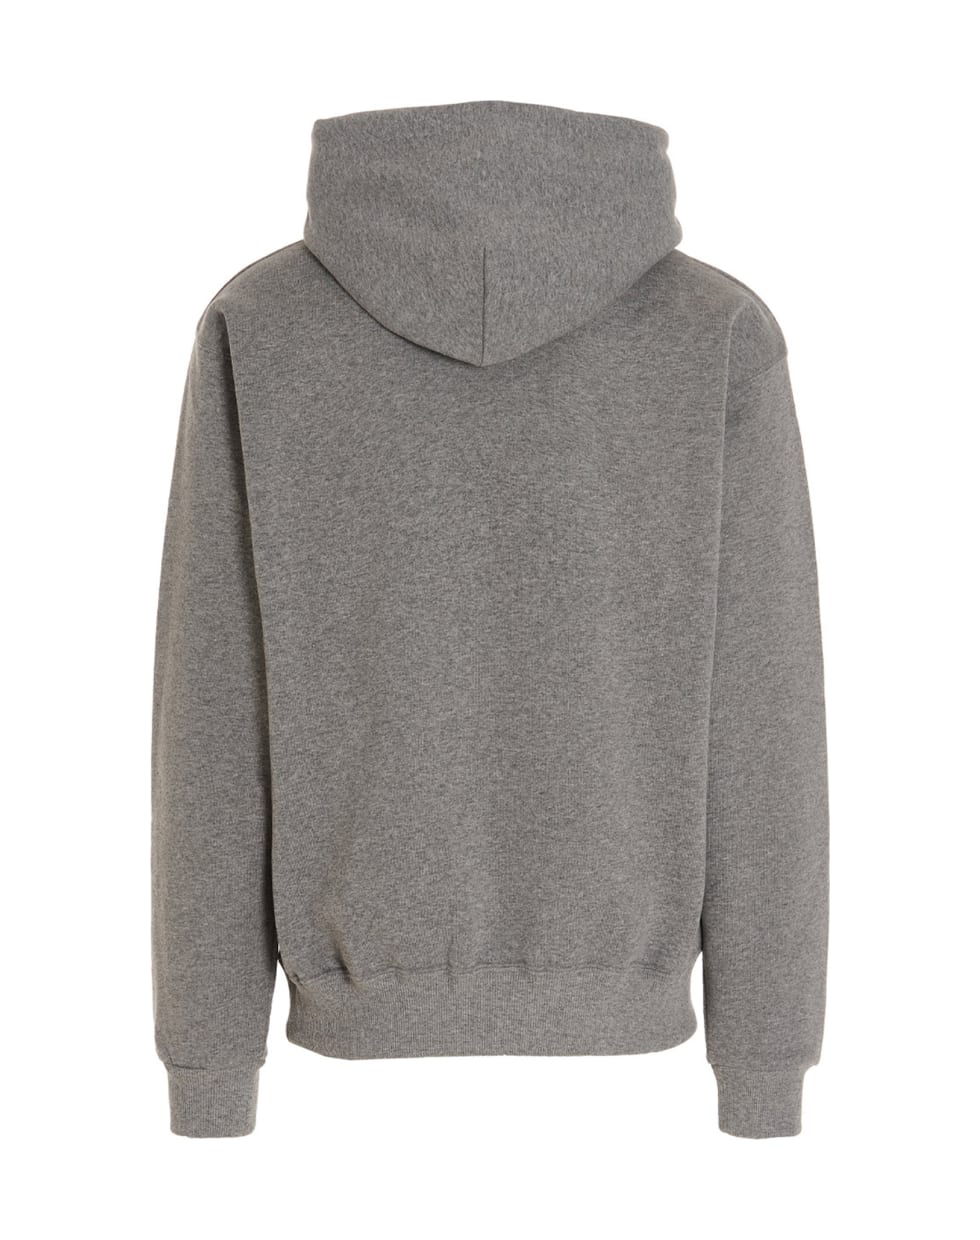 Department Five 'shend' Sweater - Grey